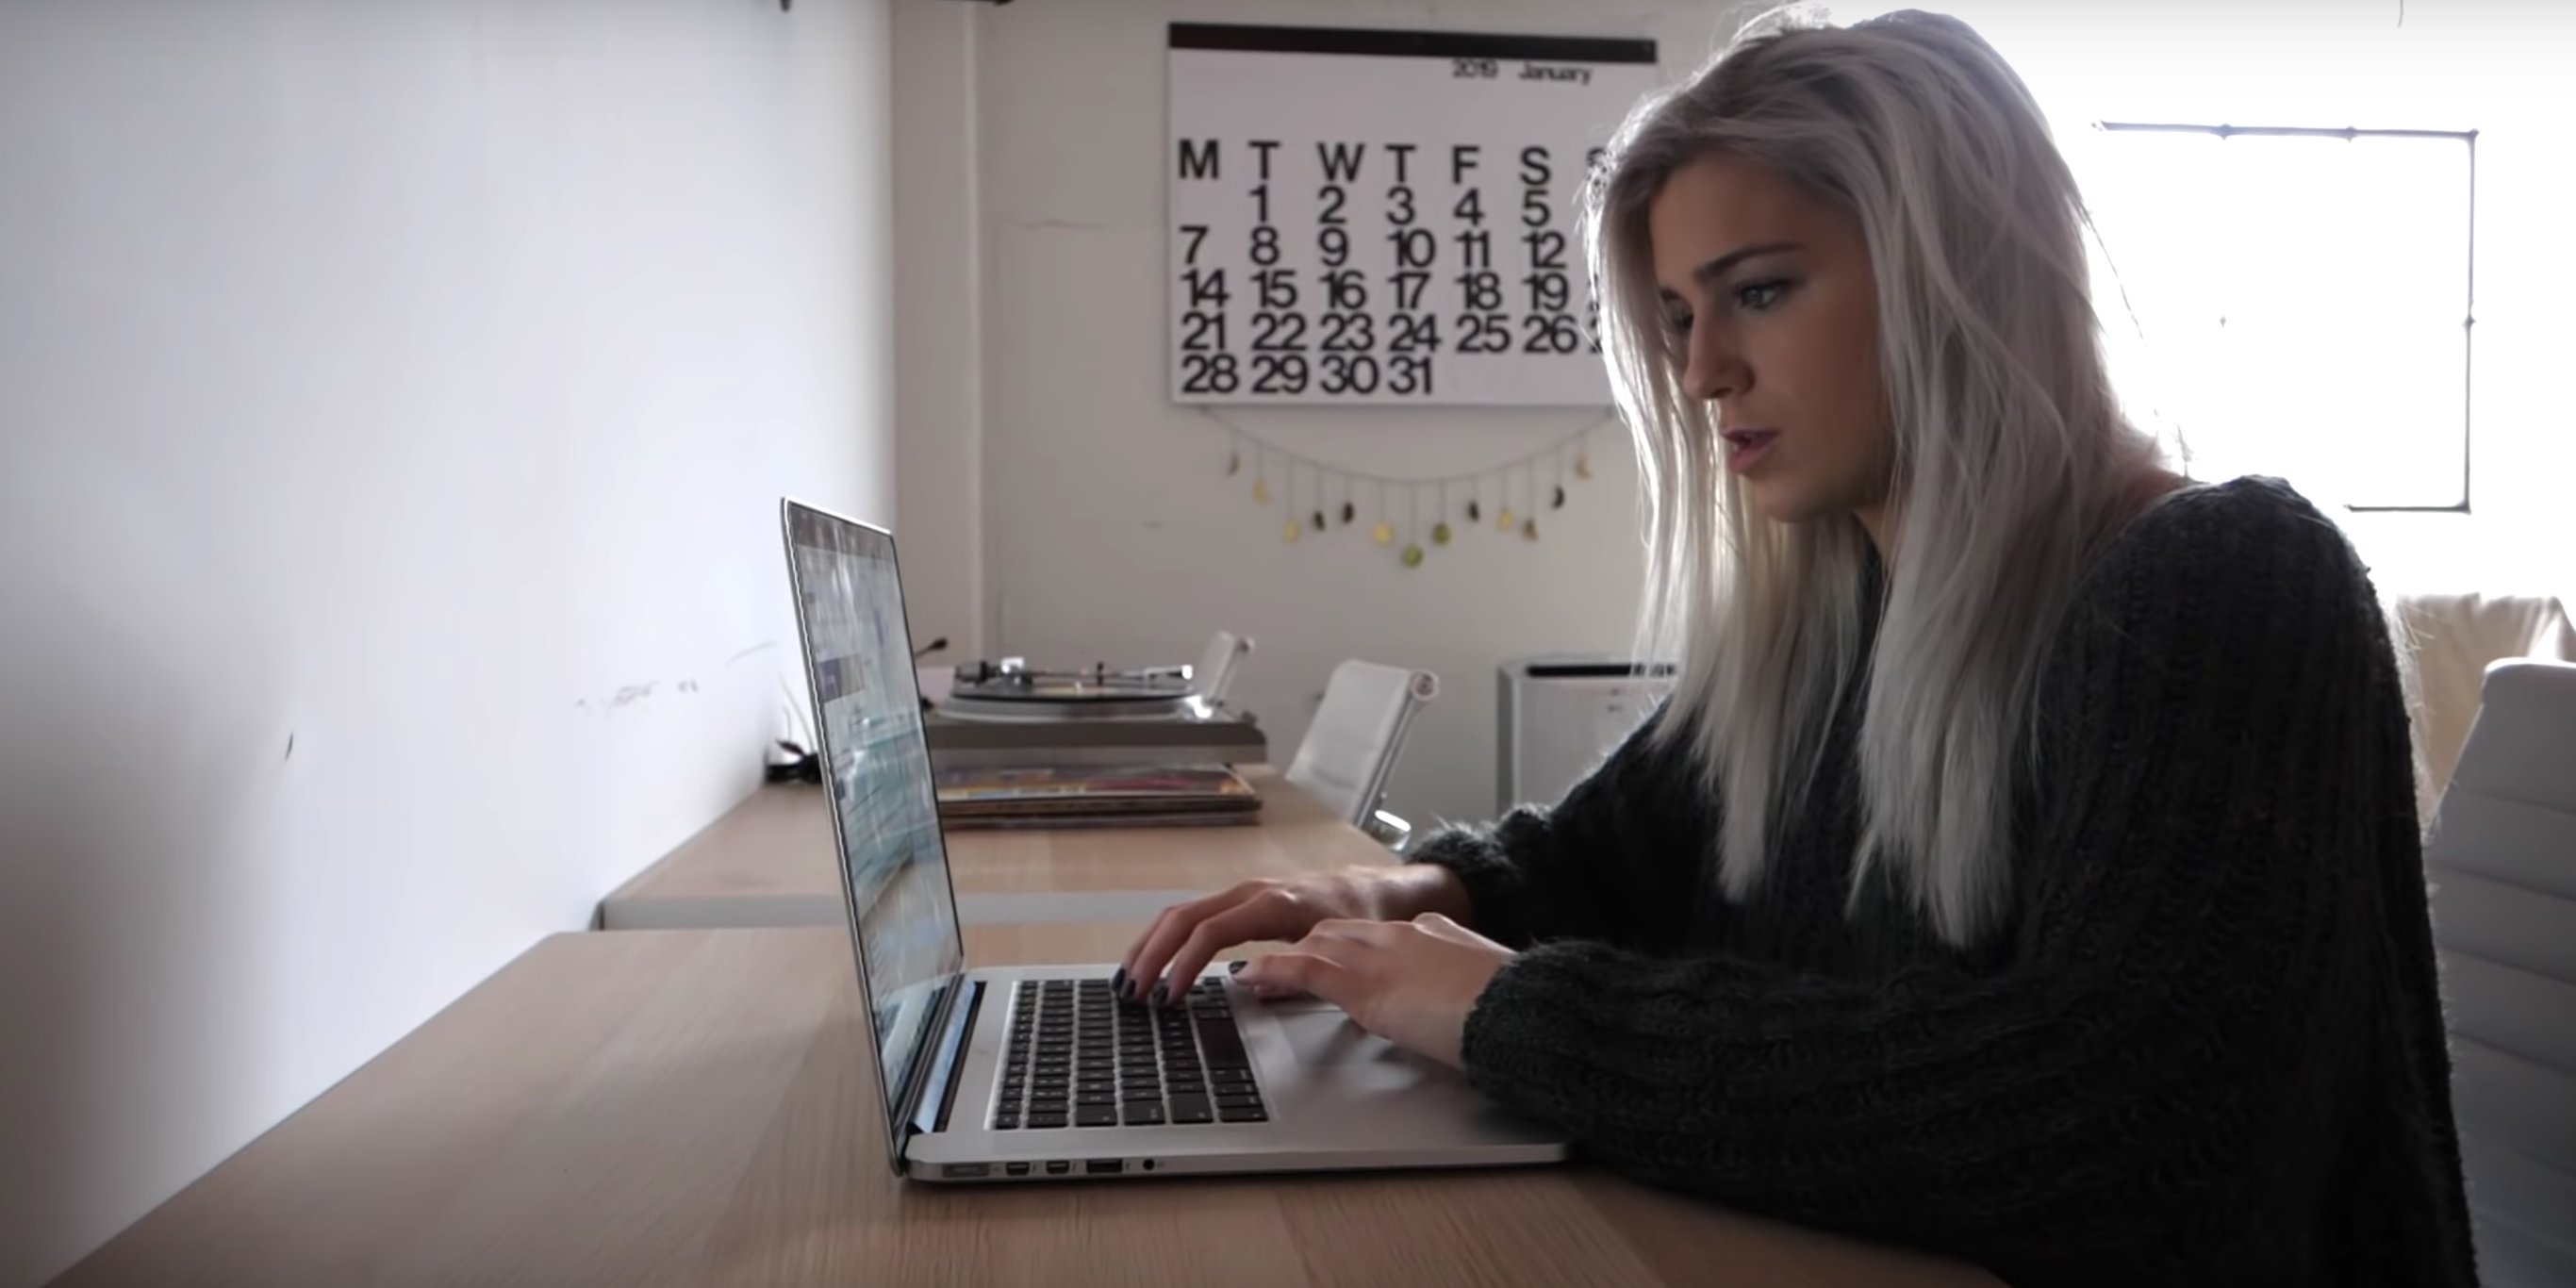 YouTube star Shelby Church breaks down how much money a video with one million views makes her